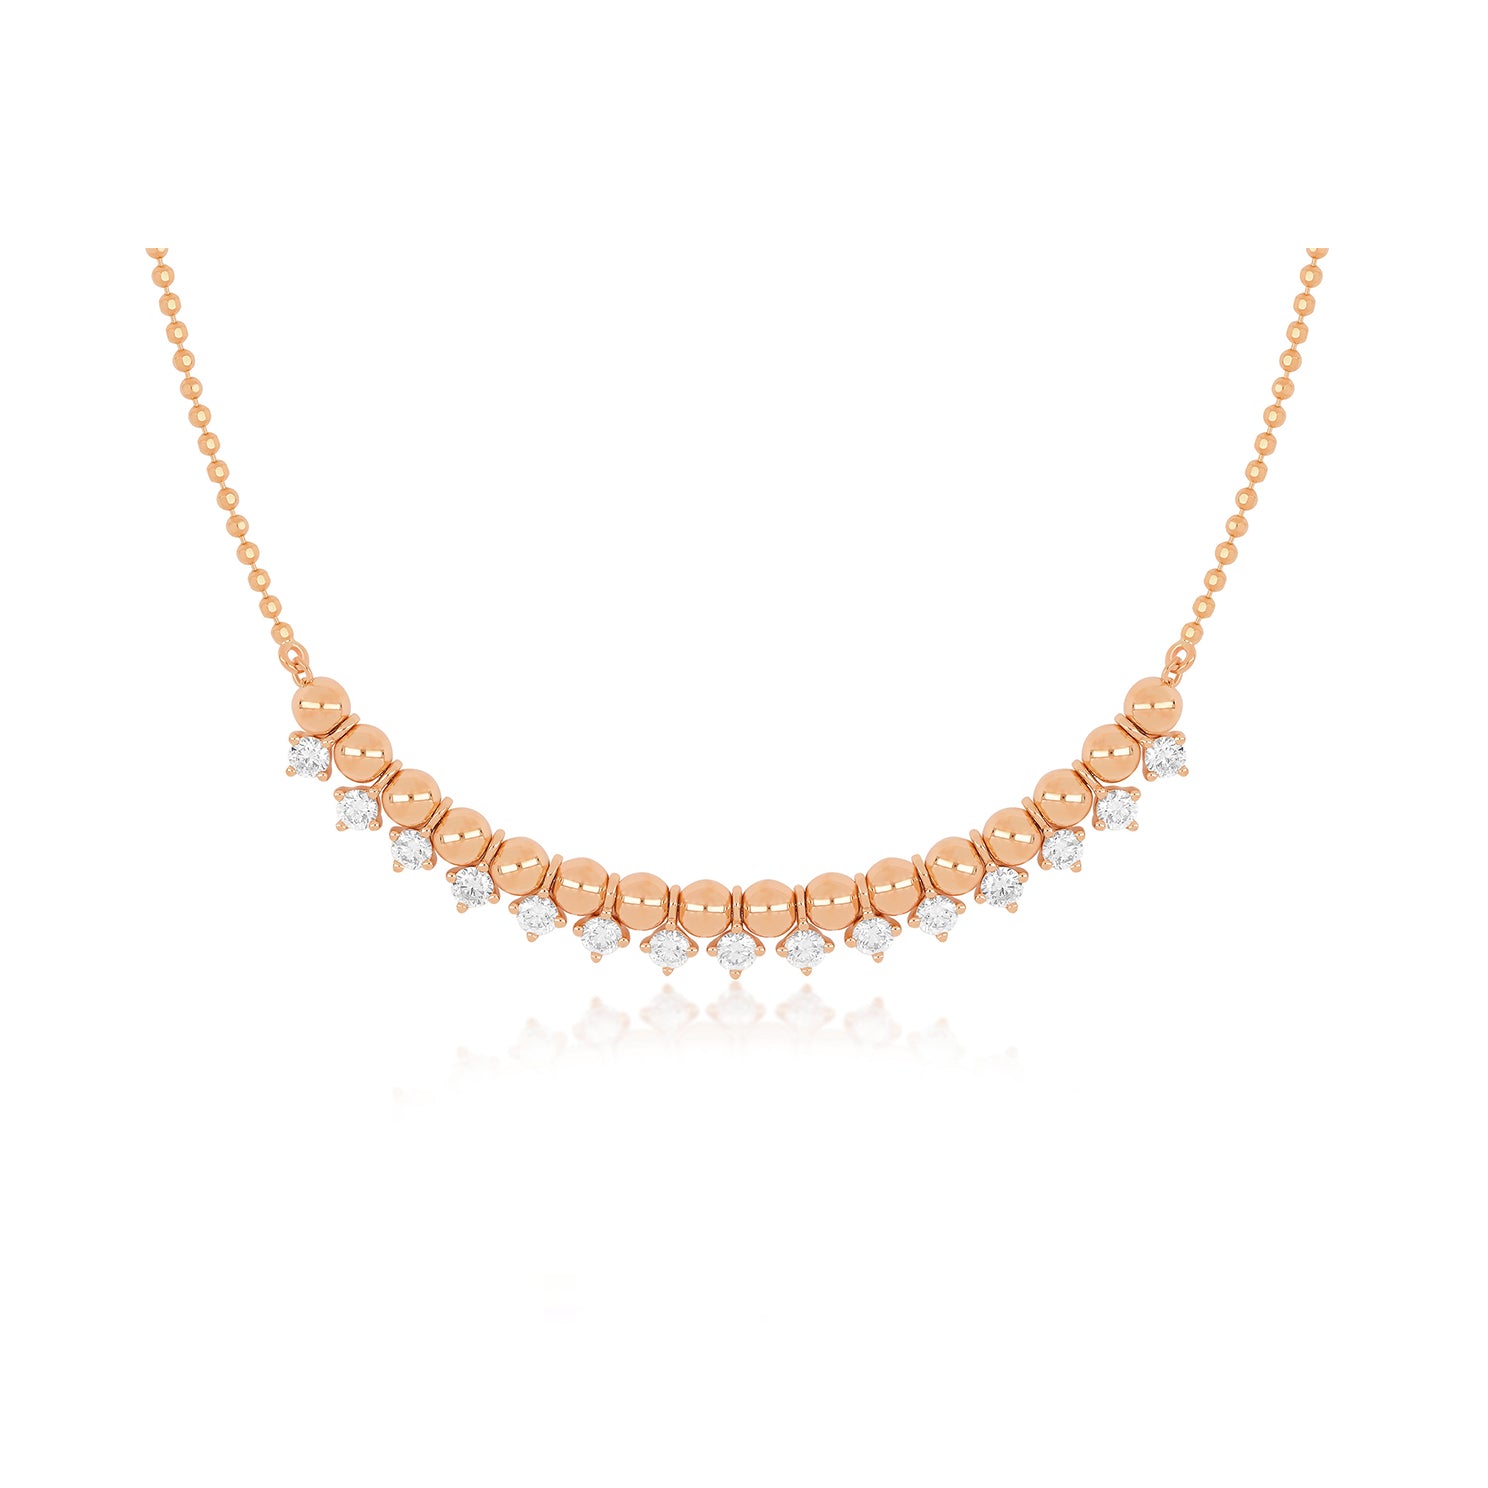 Diamond & Gold Ball Necklace in 14k rose gold